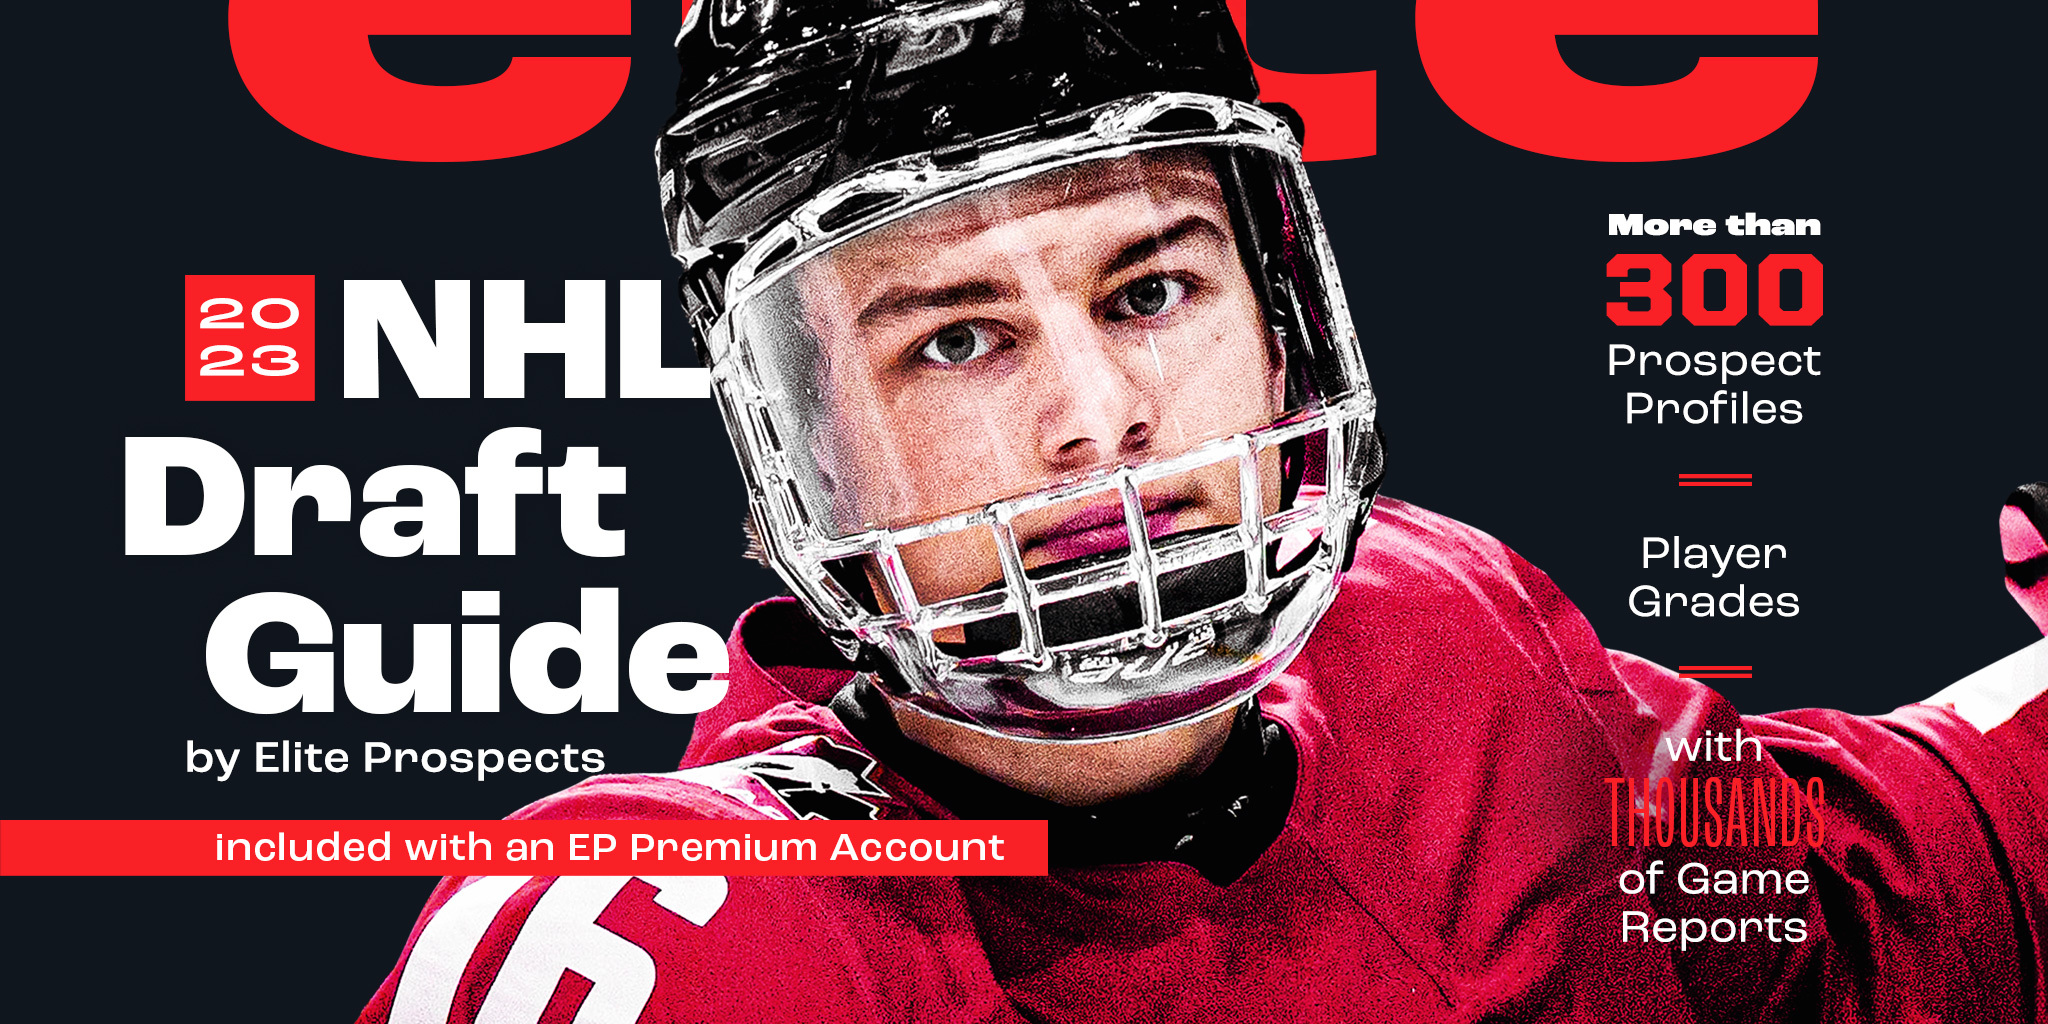 The Elite Prospects 2023 NHL Draft Guide is now available